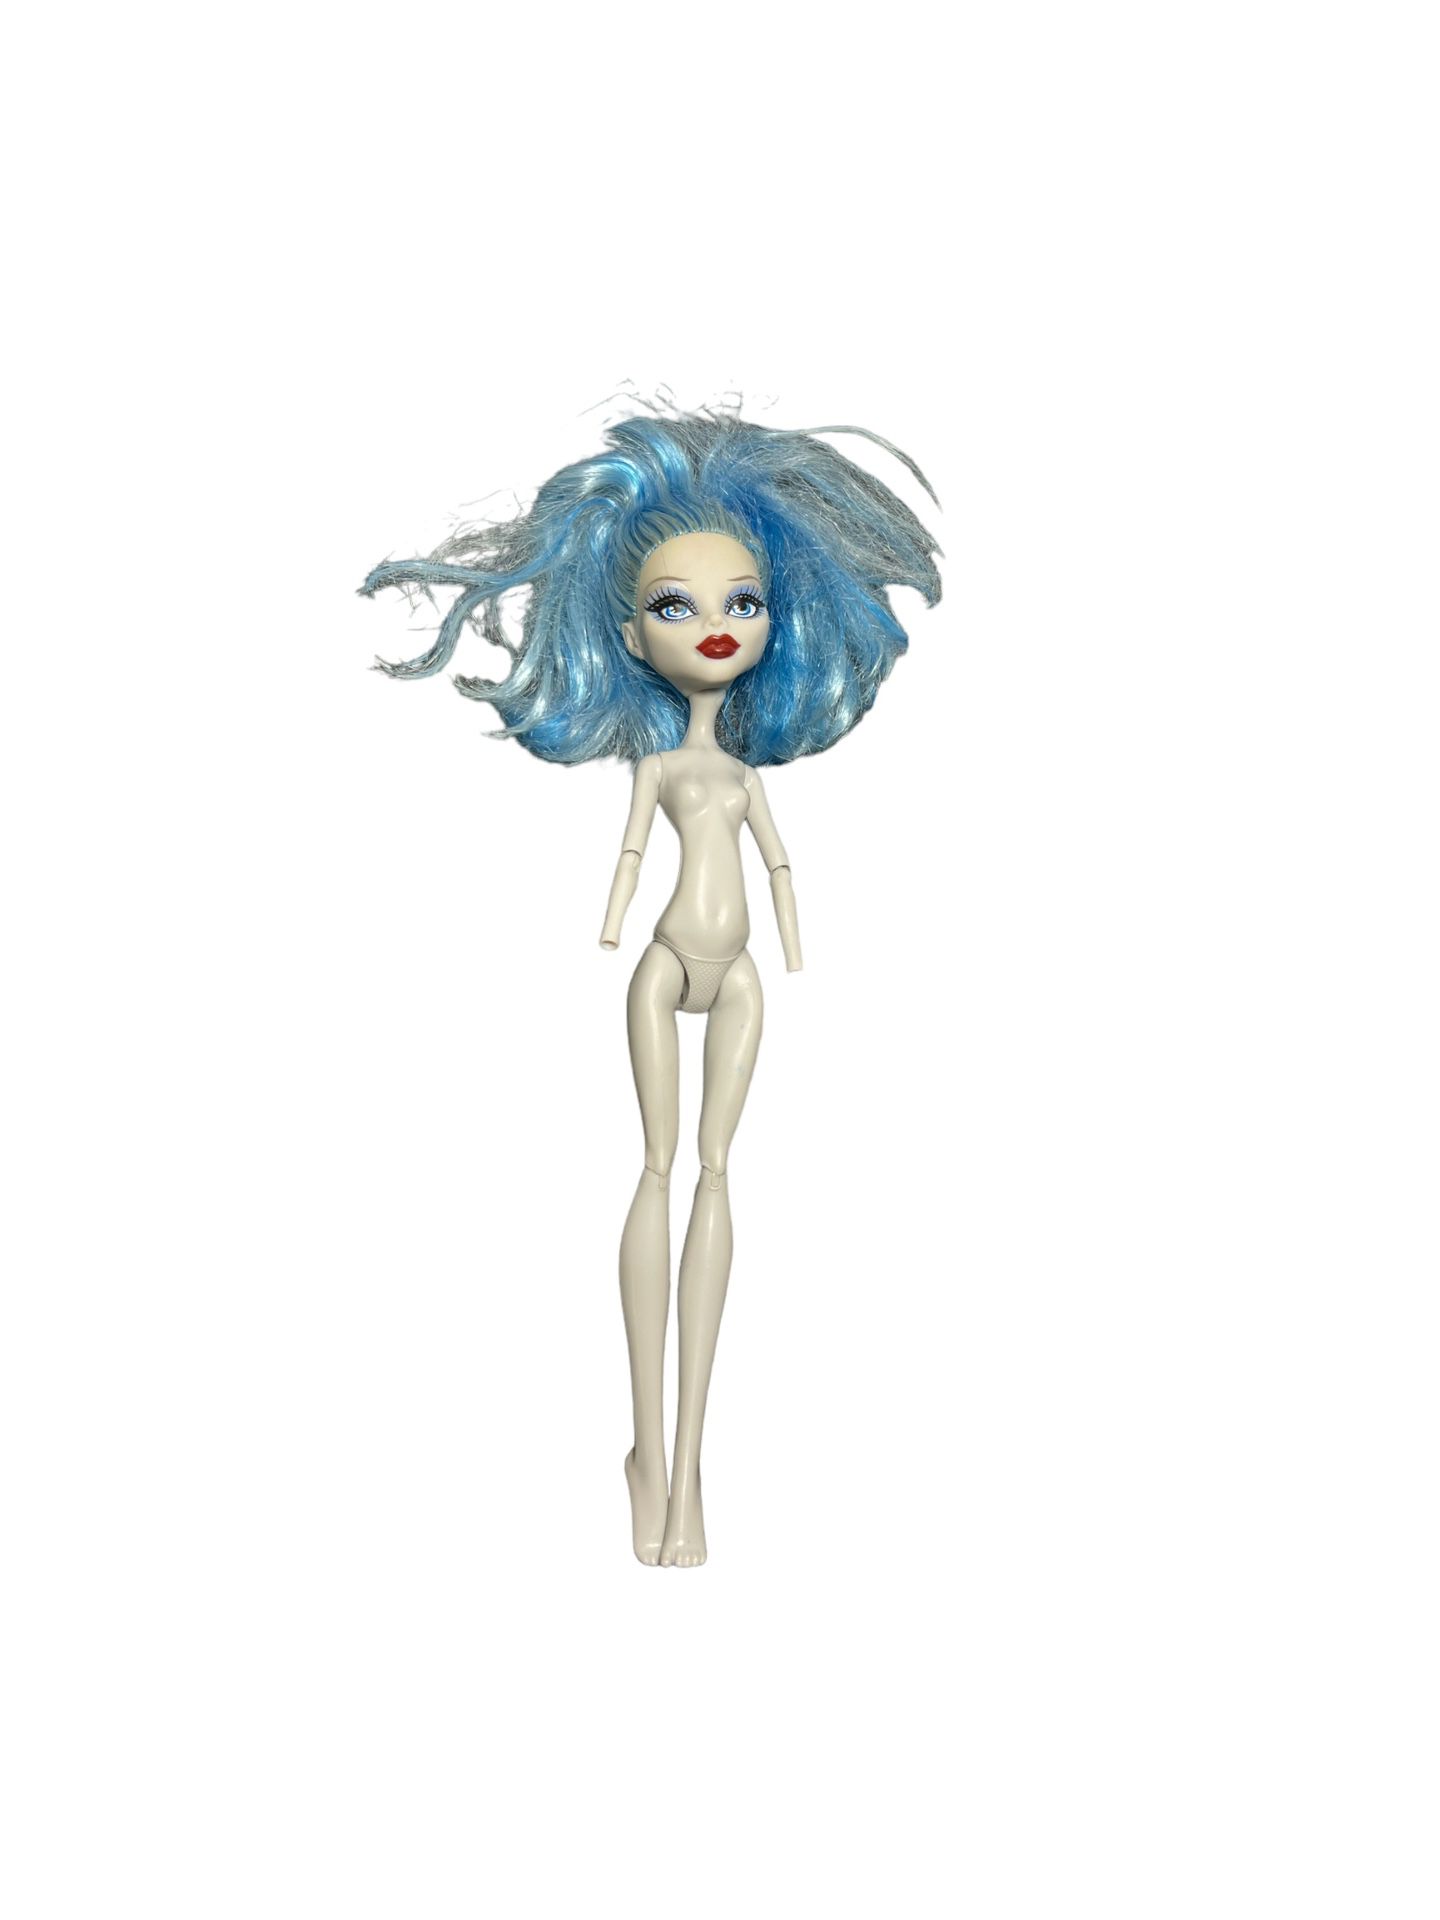 Monster High Ghoulia Yelps Doll INCOMPLETE (READ)